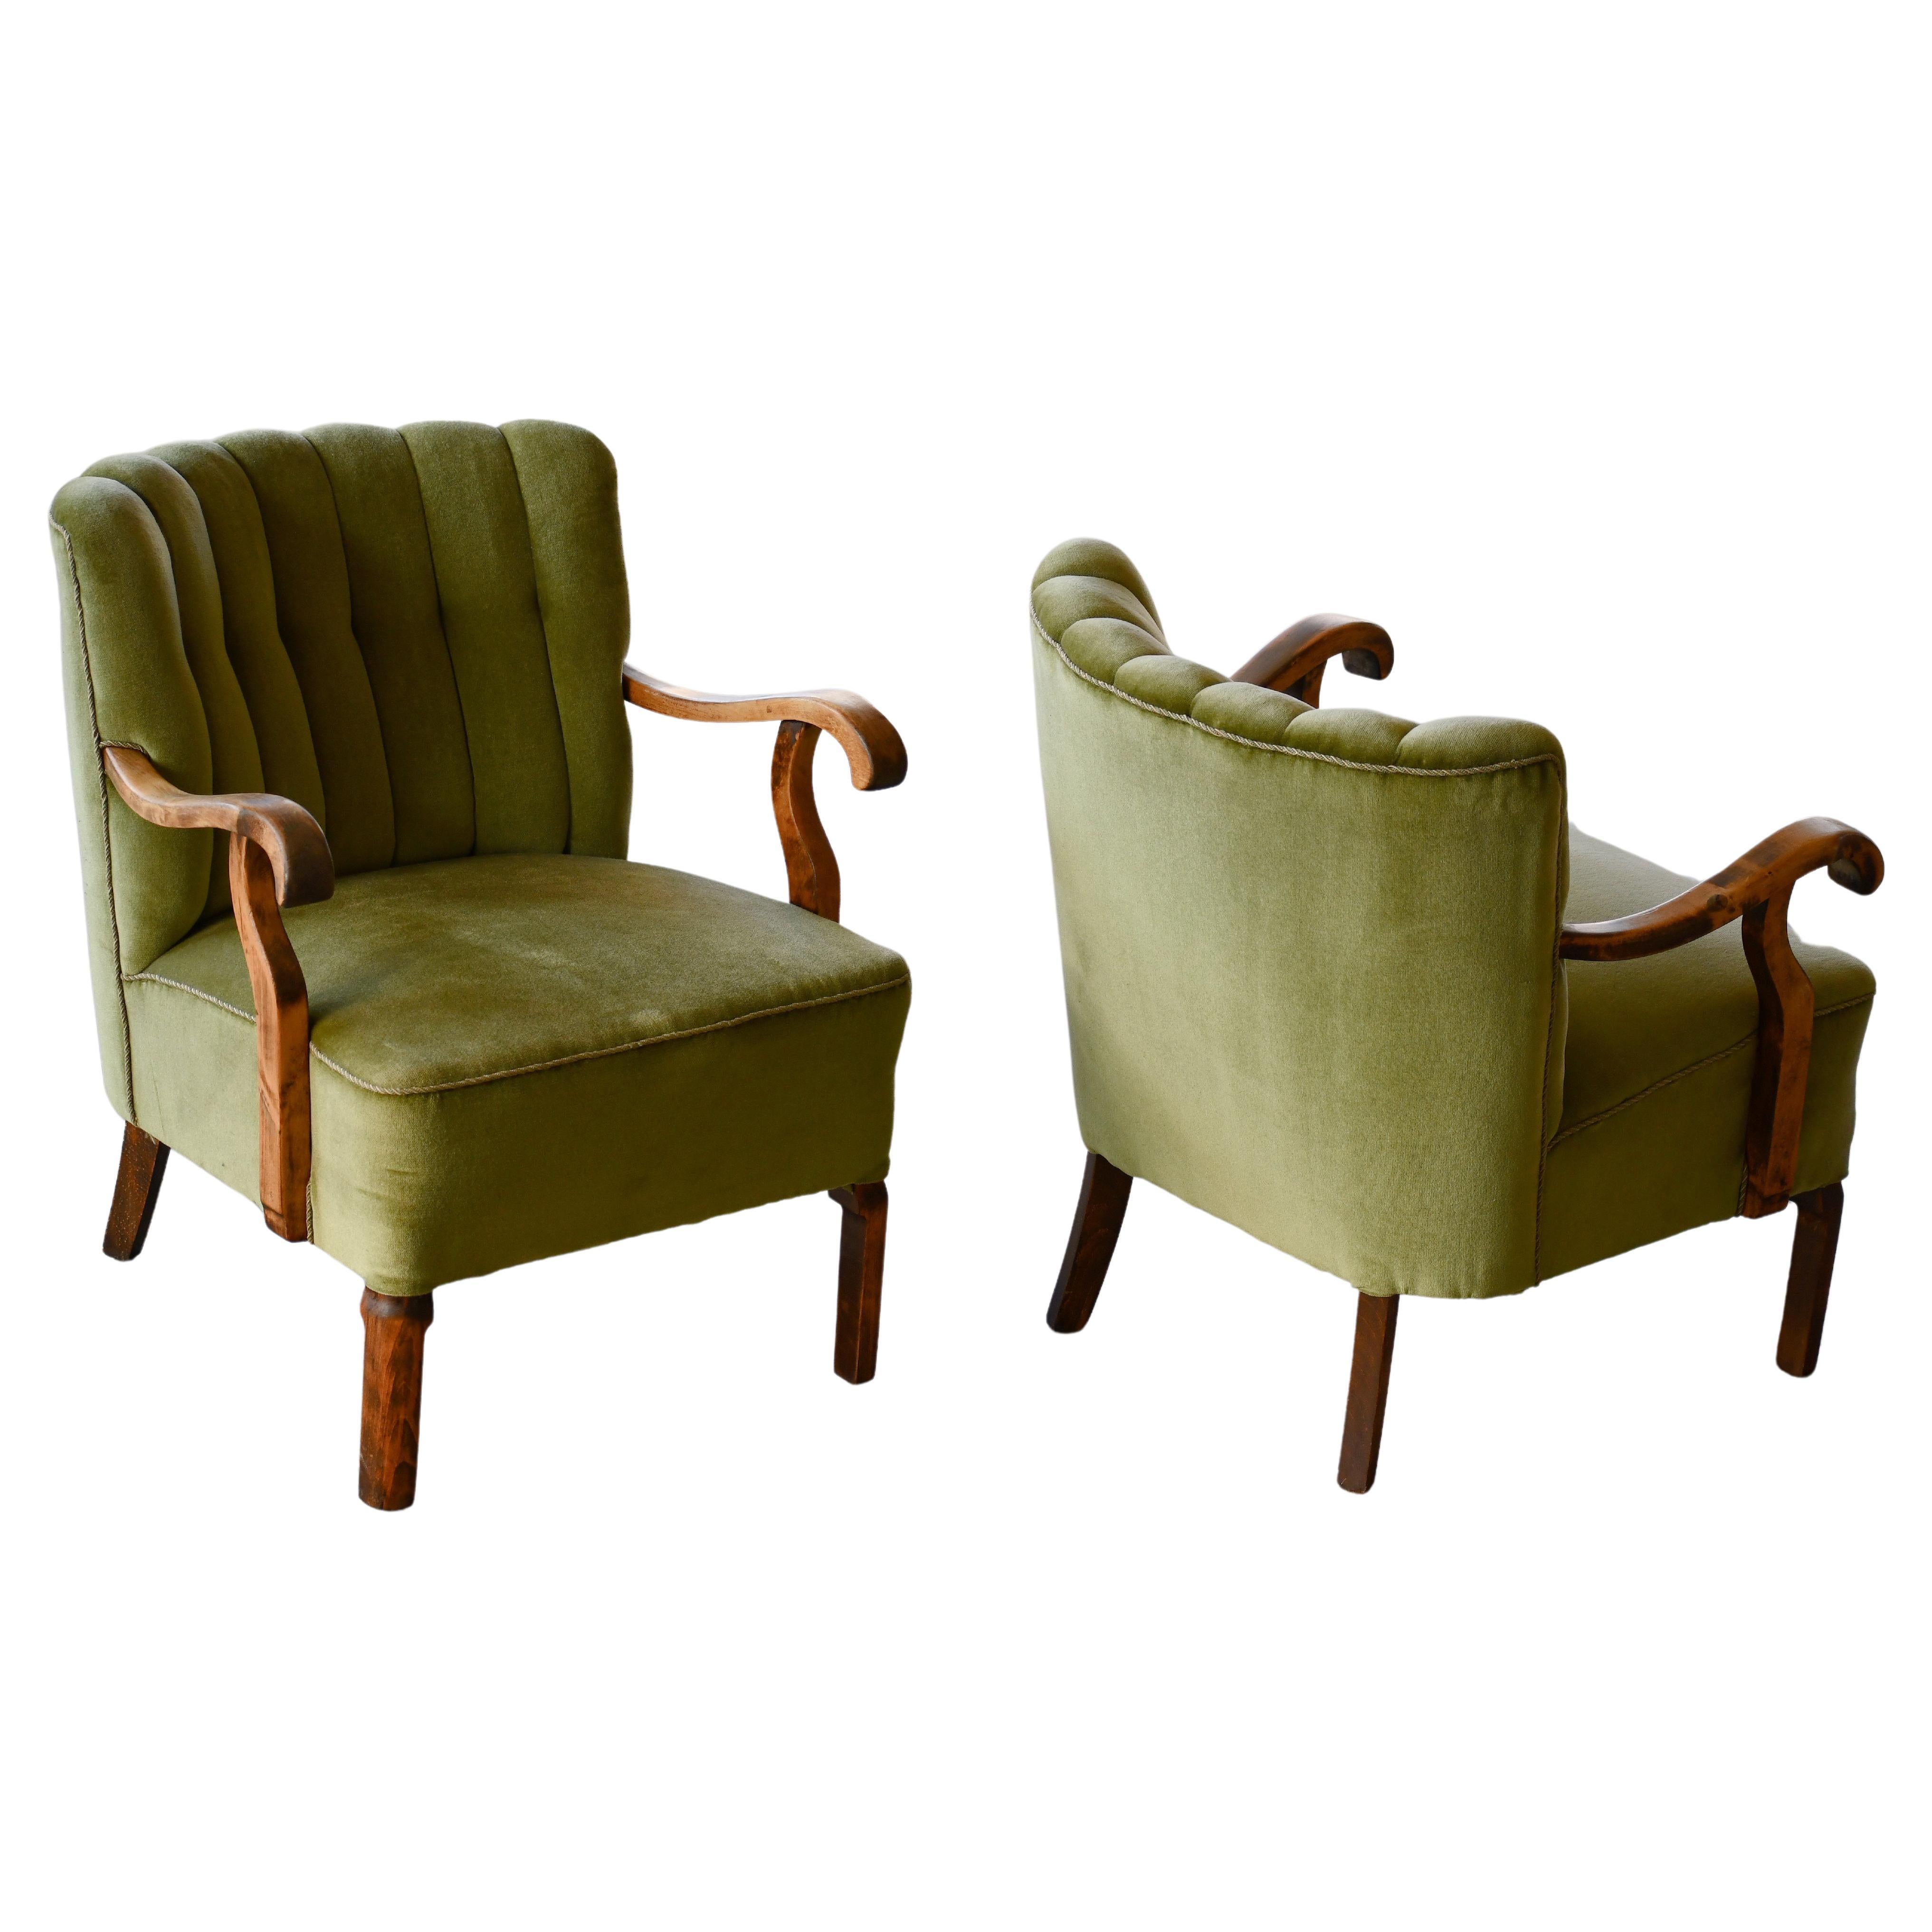 Pair of Danish 1940s Channel Back Low Easy Chairs with Open Armrests by Slagelse